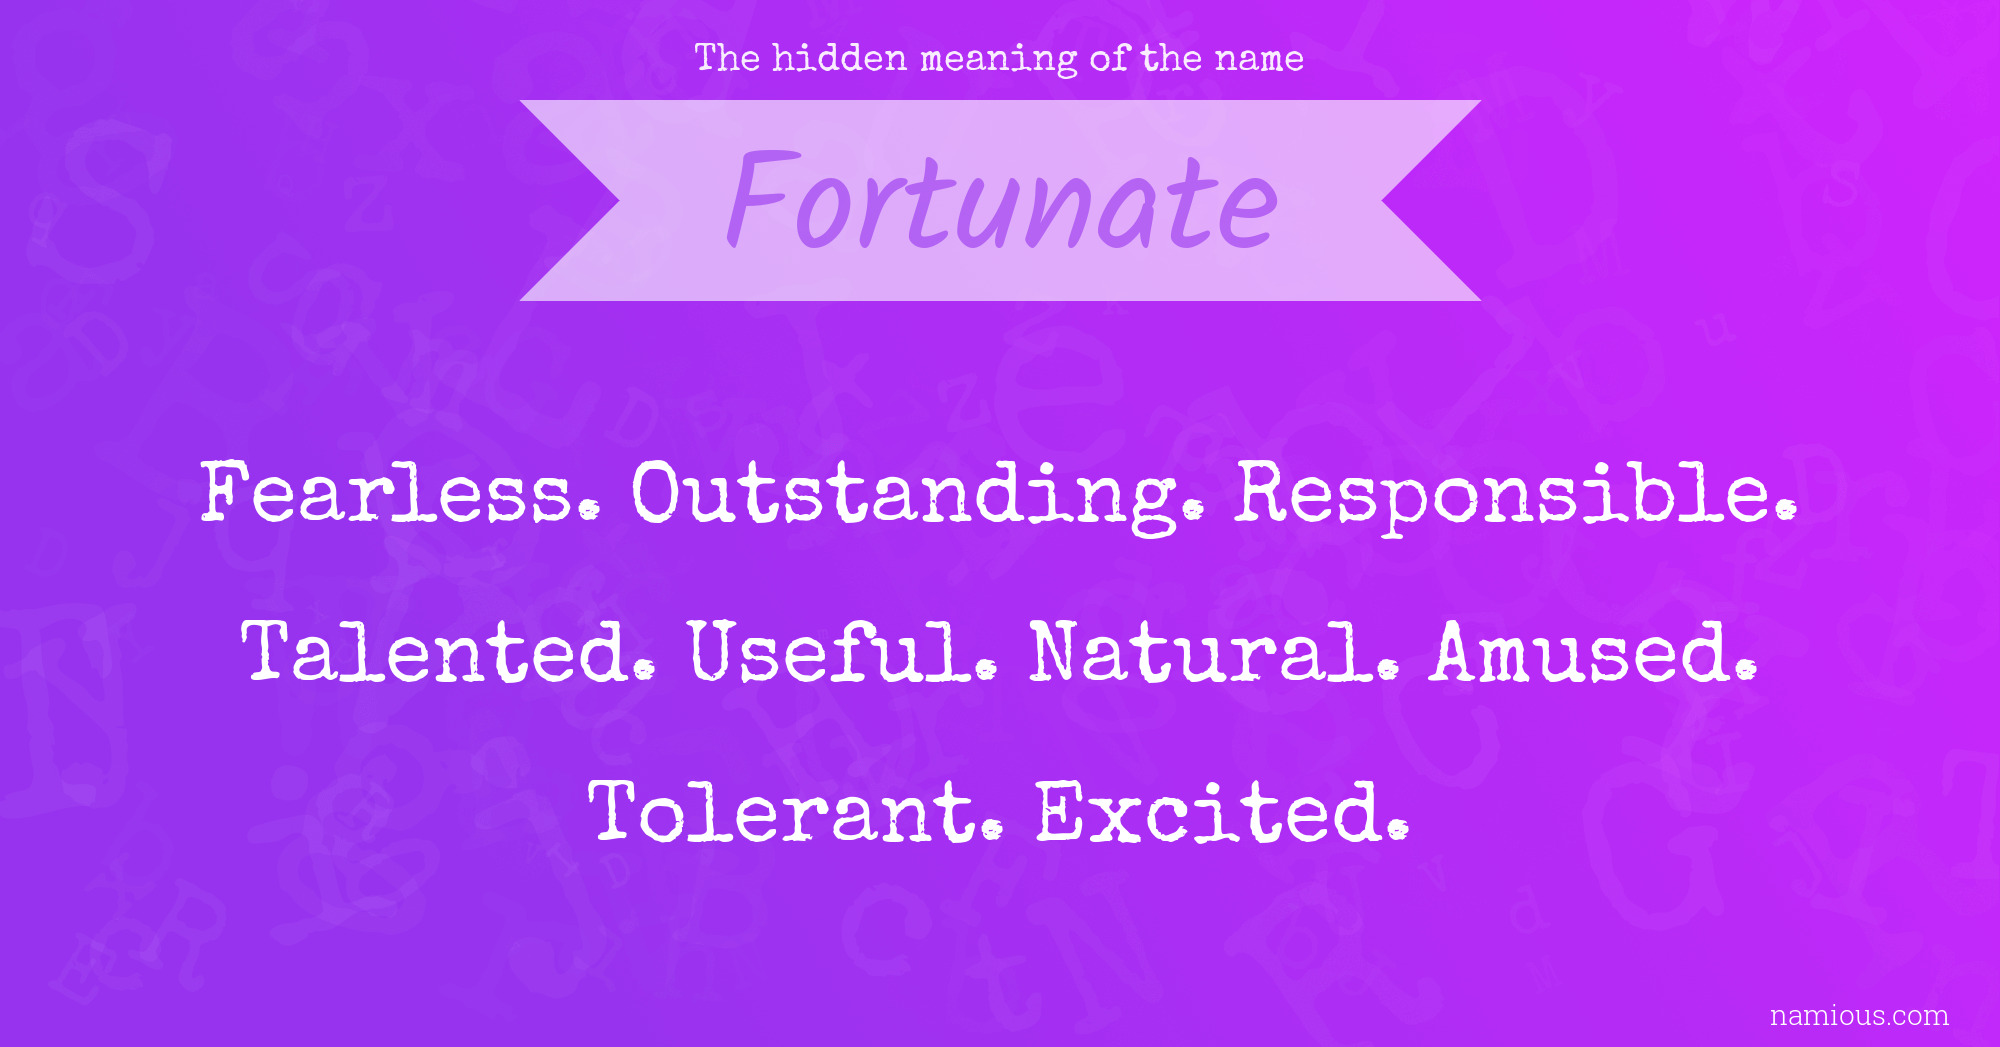 The hidden meaning of the name Fortunate